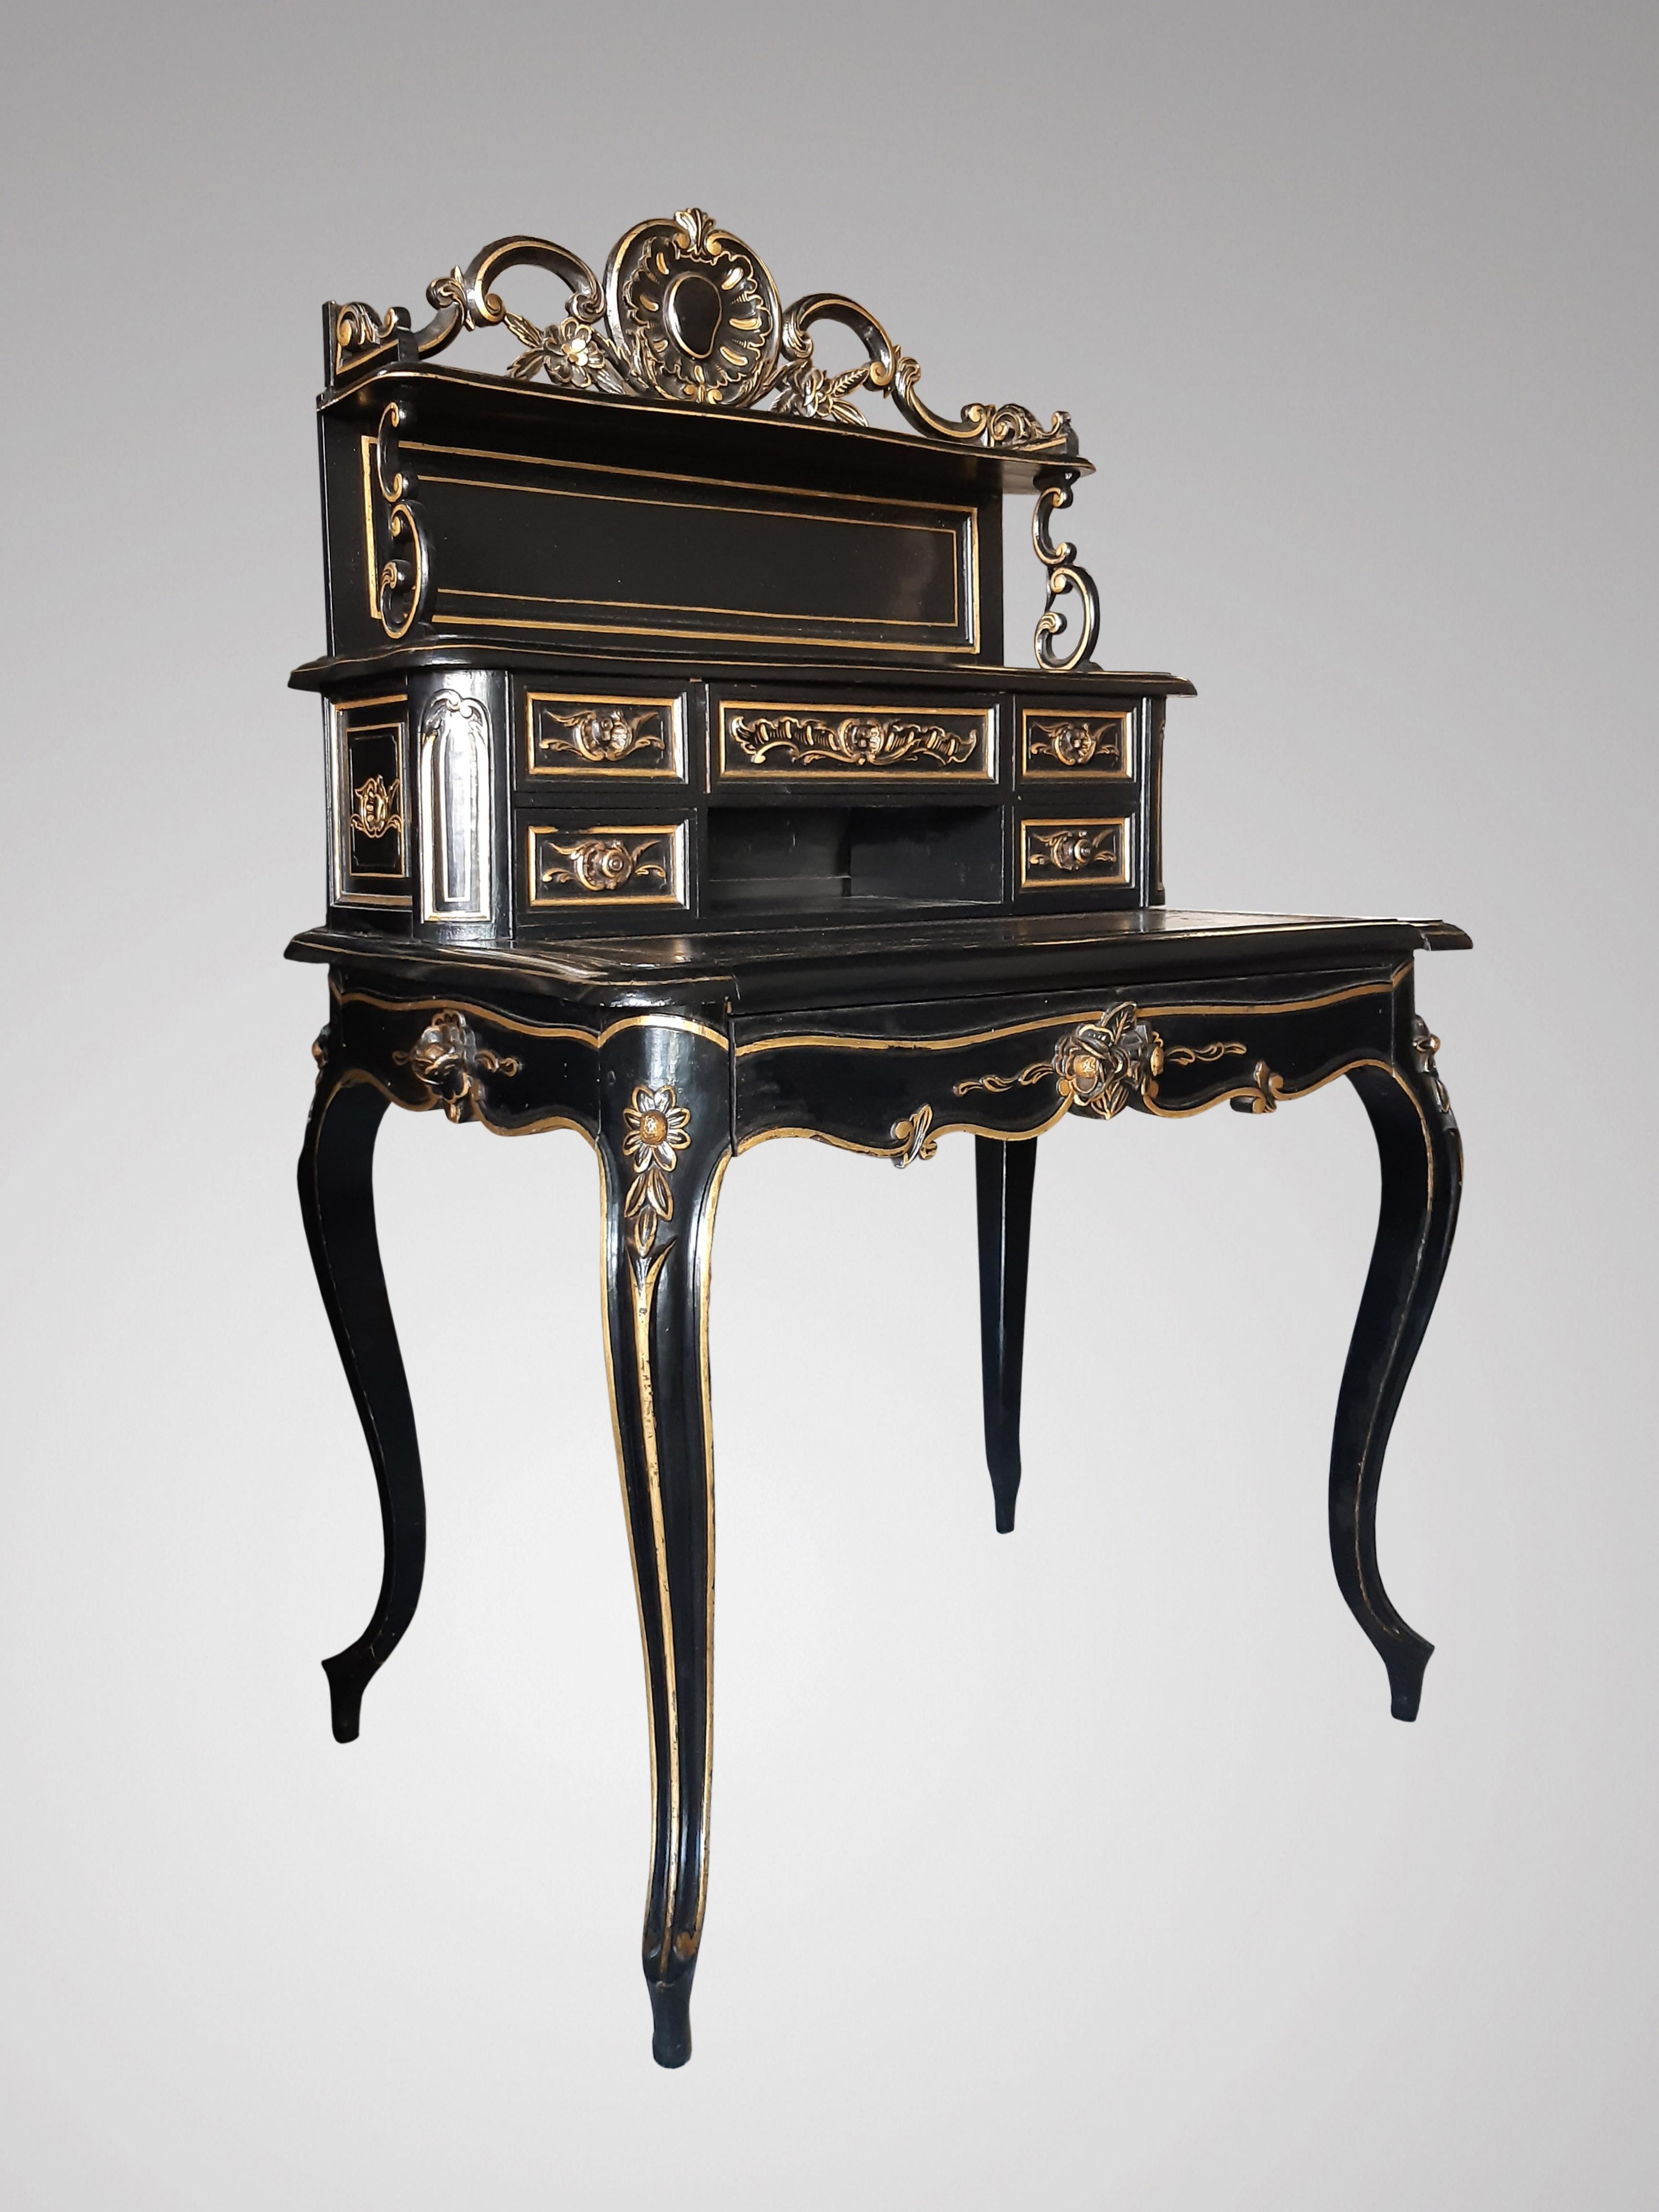 Hand-Painted Secretaire Happiness of the Day Small Black Desk Napoleon III french antiquity